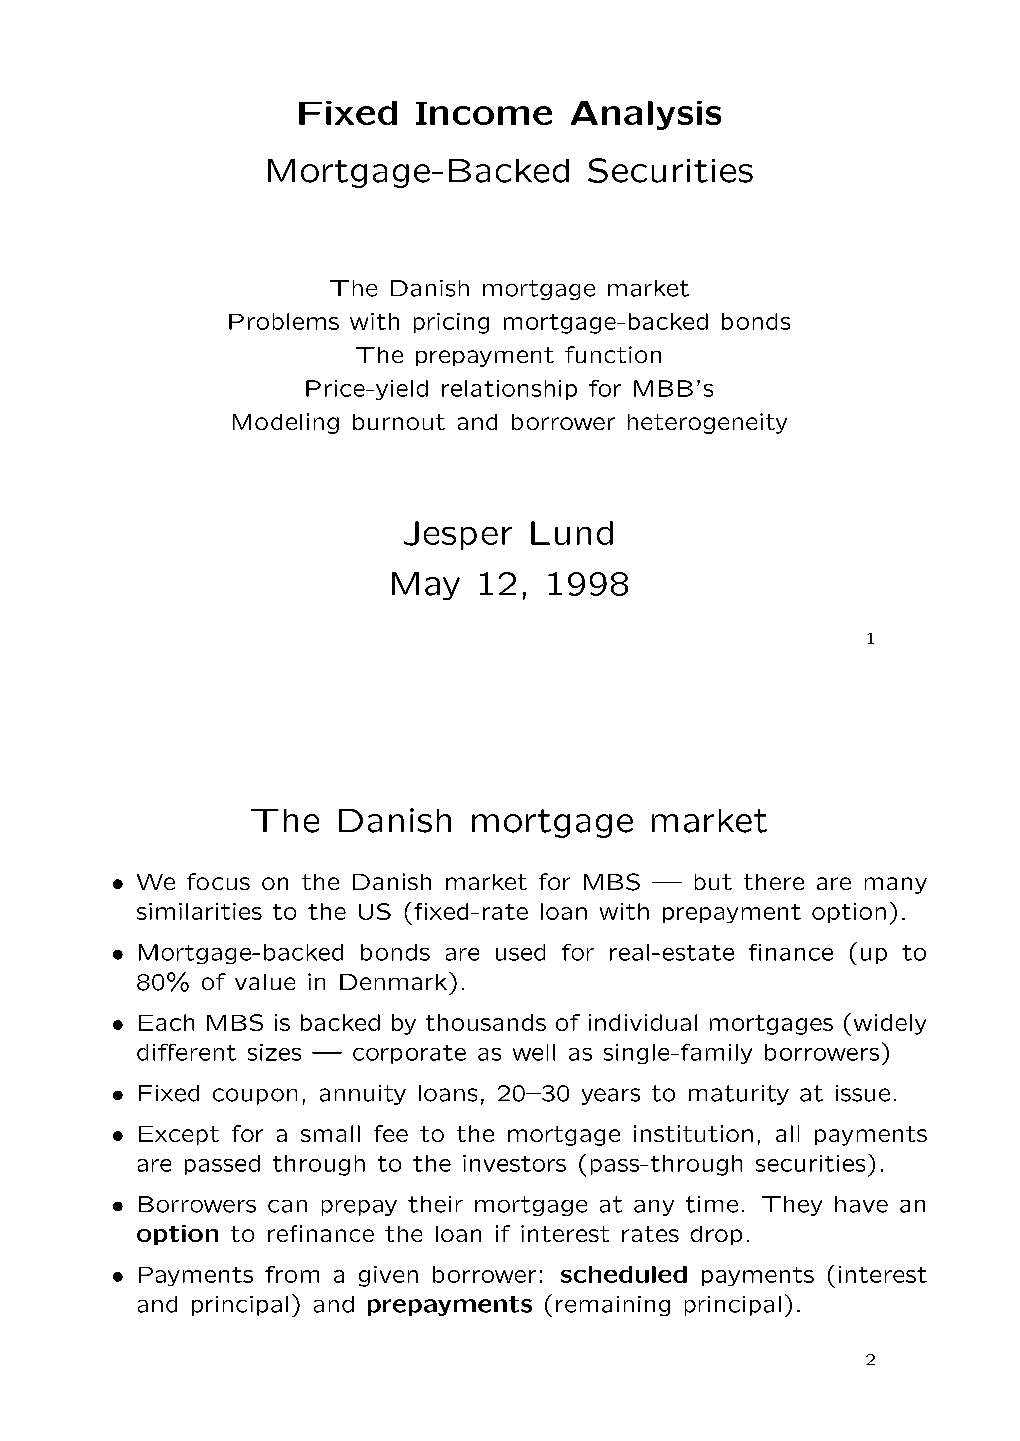 Mortgage-Backed Securities Jesper Lund May 12, 1998 the Danish